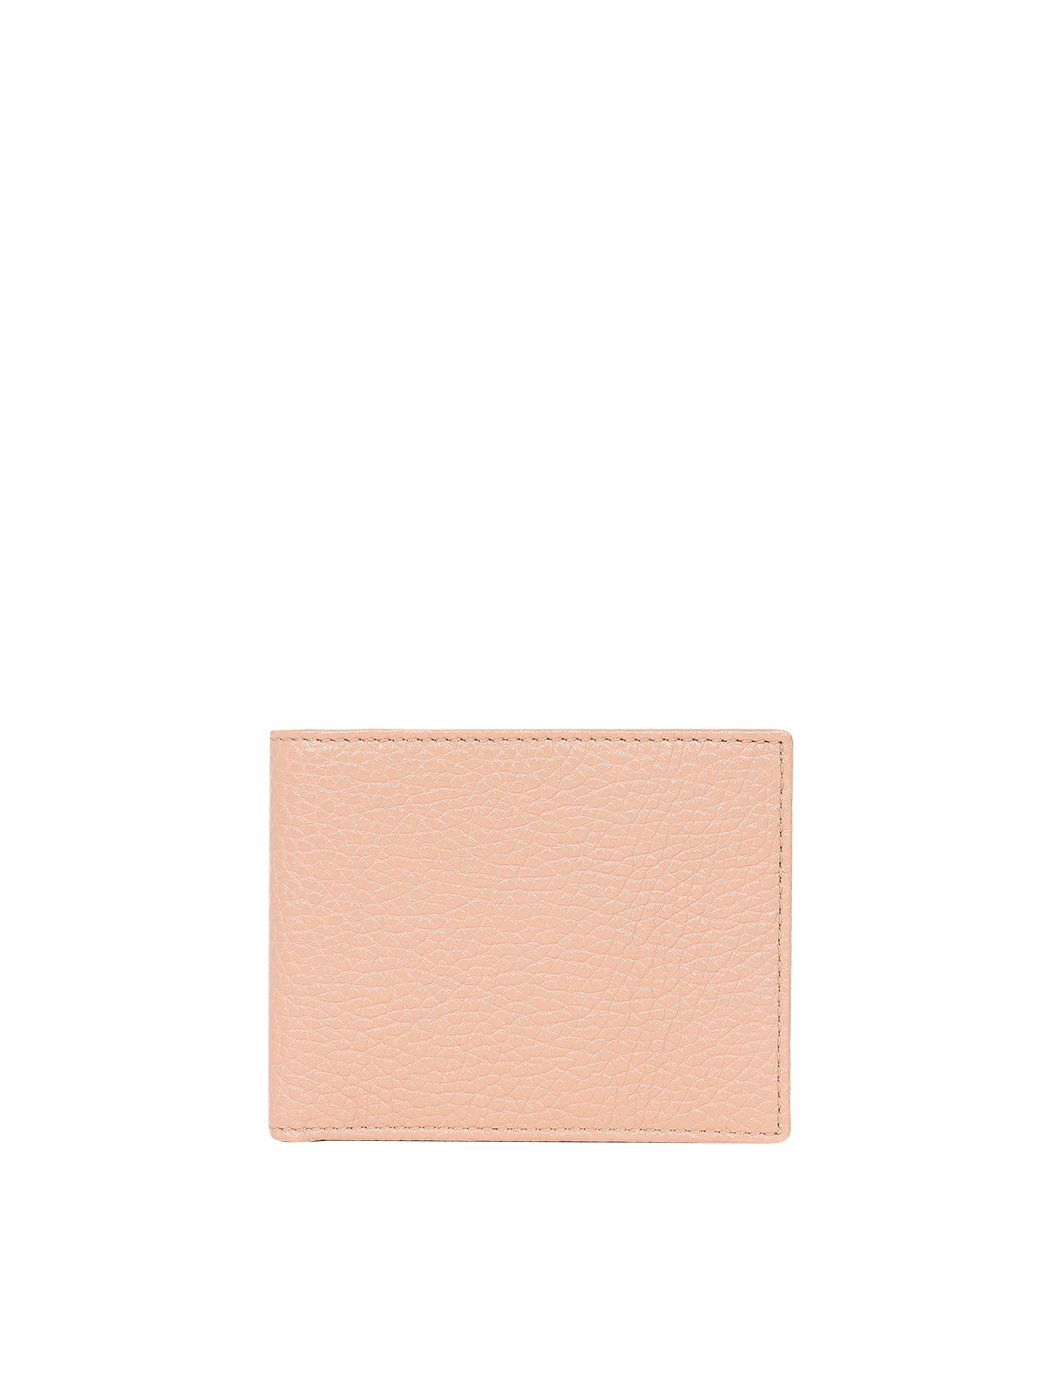 Billfold Leather Wallet with Coin Pocket Camel